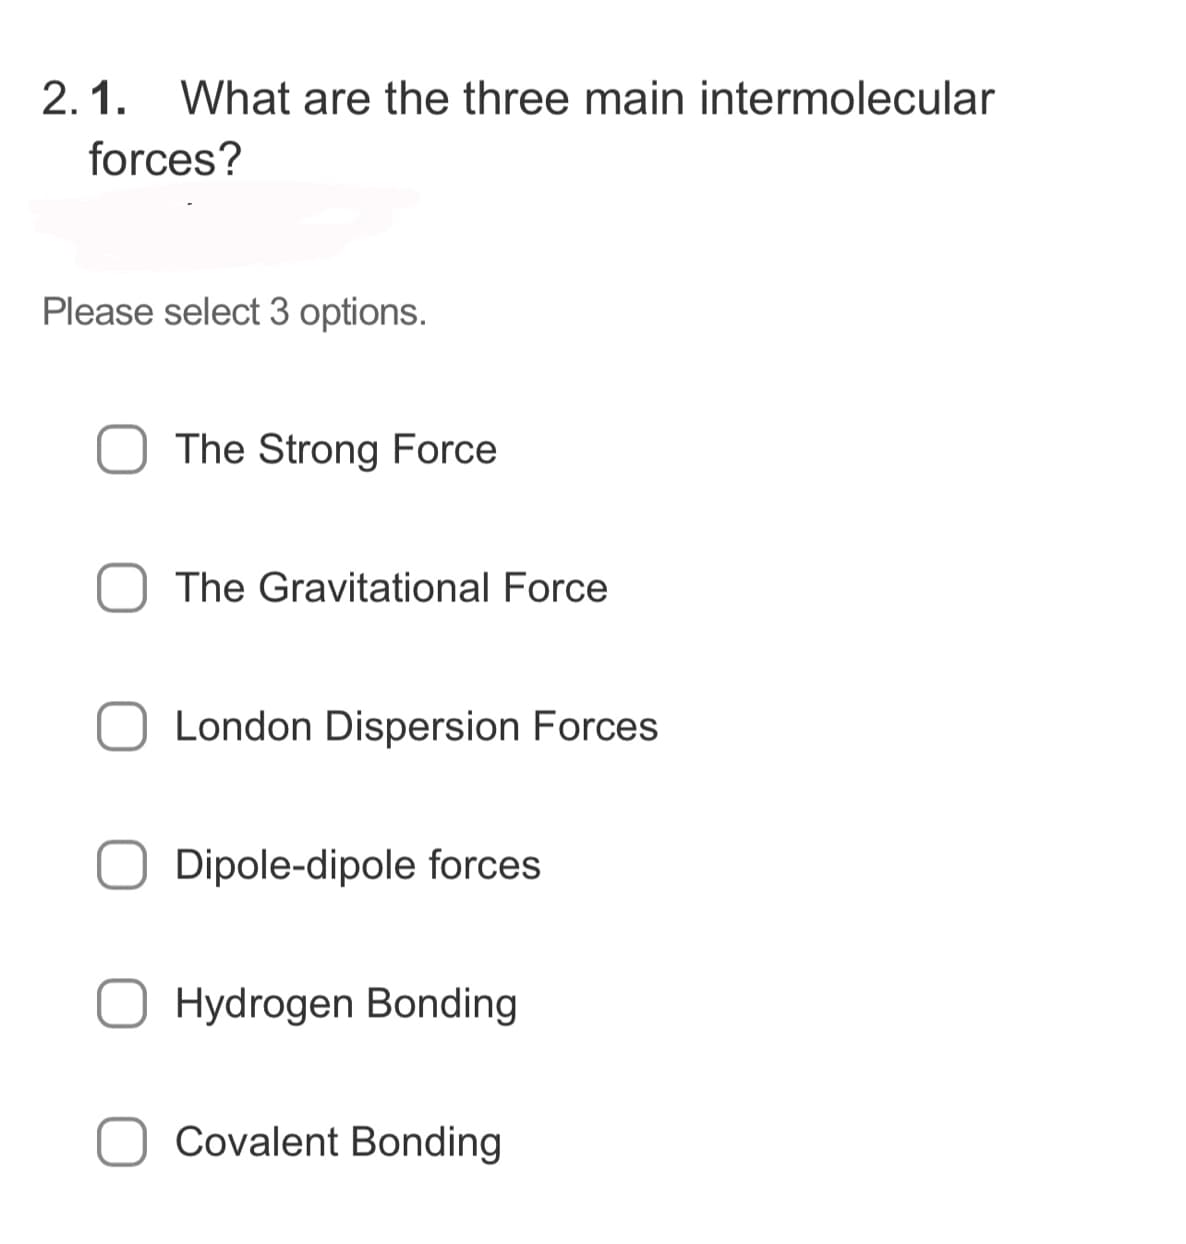 2.1. What are the three main intermolecular
forces?
Please select 3 options.
The Strong Force
The Gravitational Force
London Dispersion Forces
Dipole-dipole forces
Hydrogen Bonding
Covalent Bonding